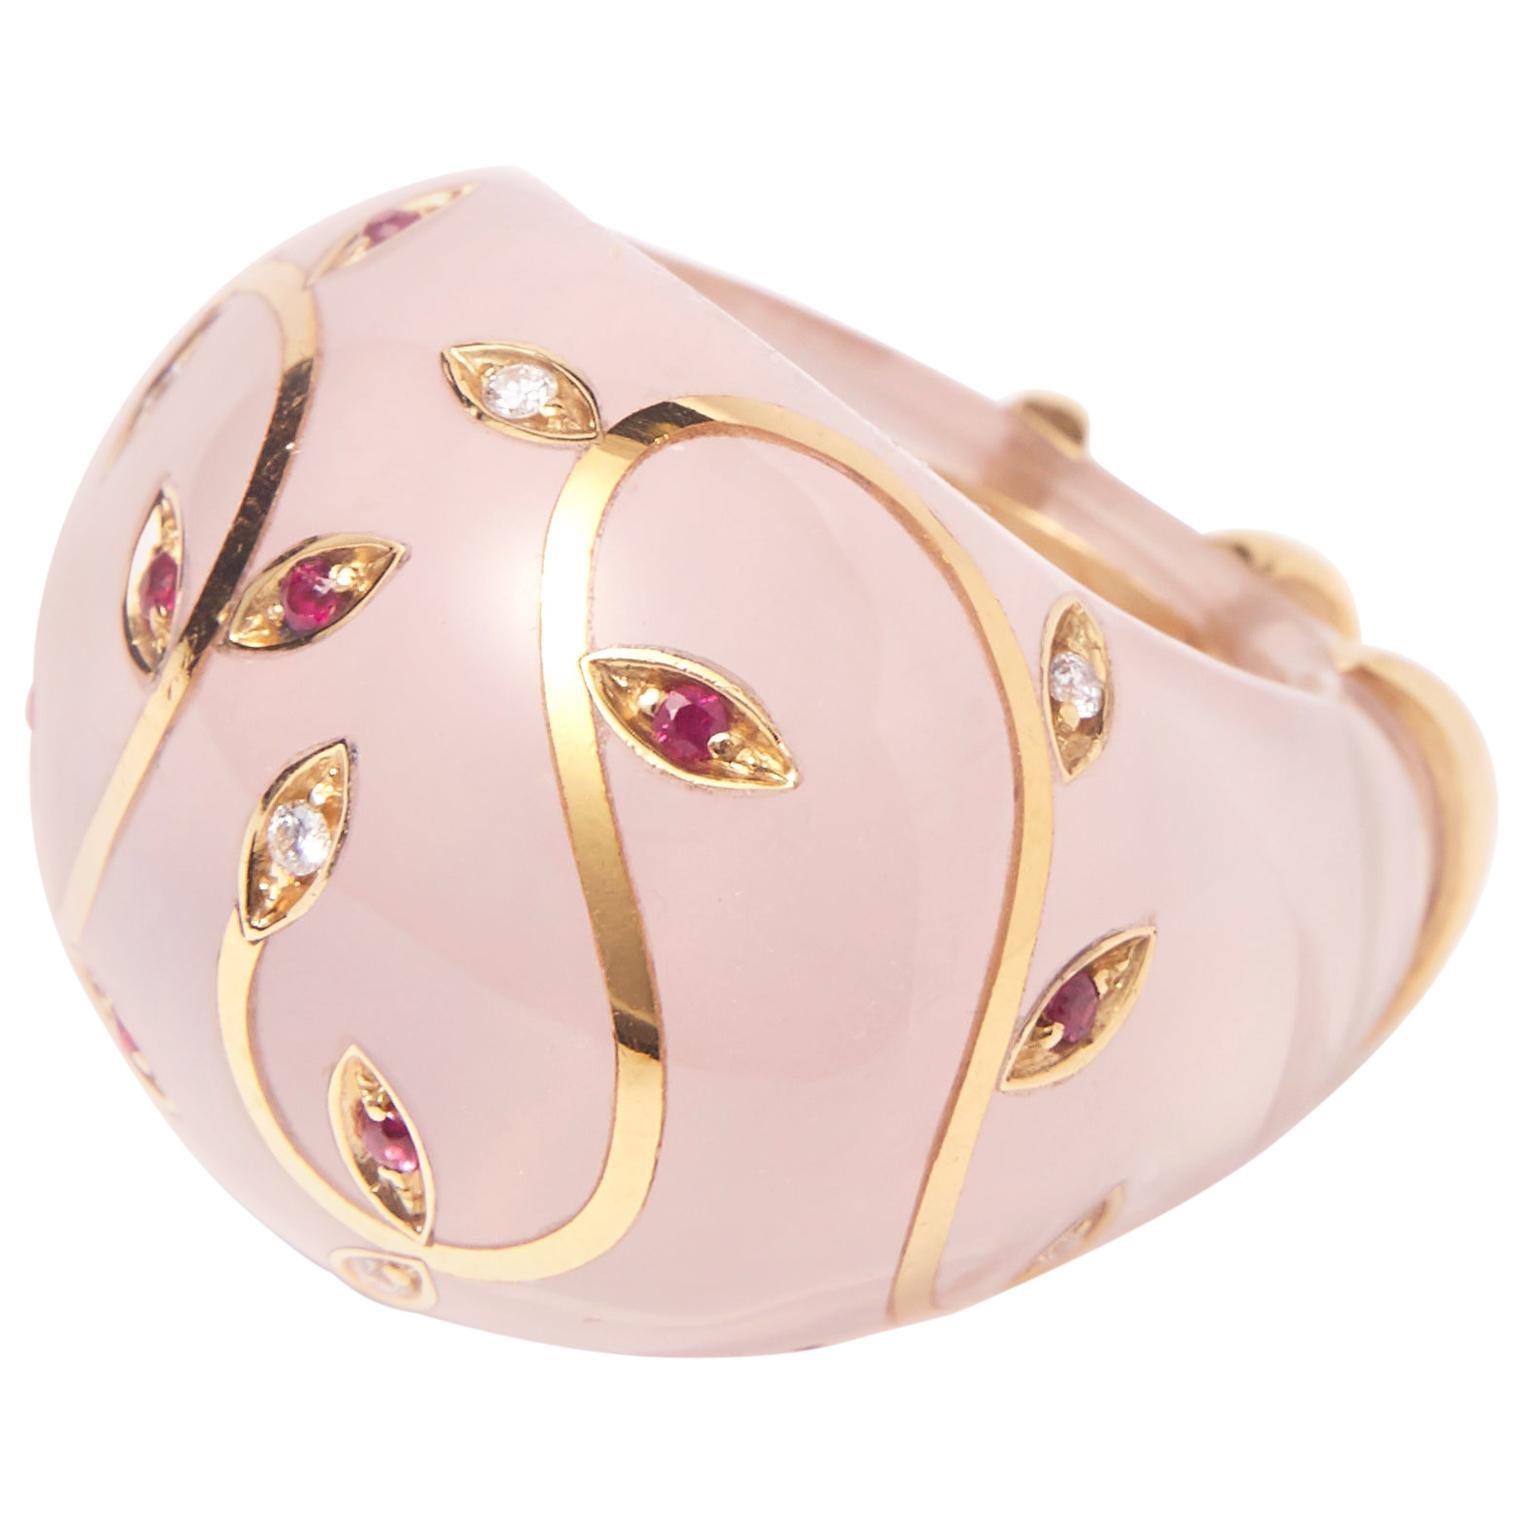 Rose Quartz Ring with Yellow Gold inlay set with Rubies and Diamonds